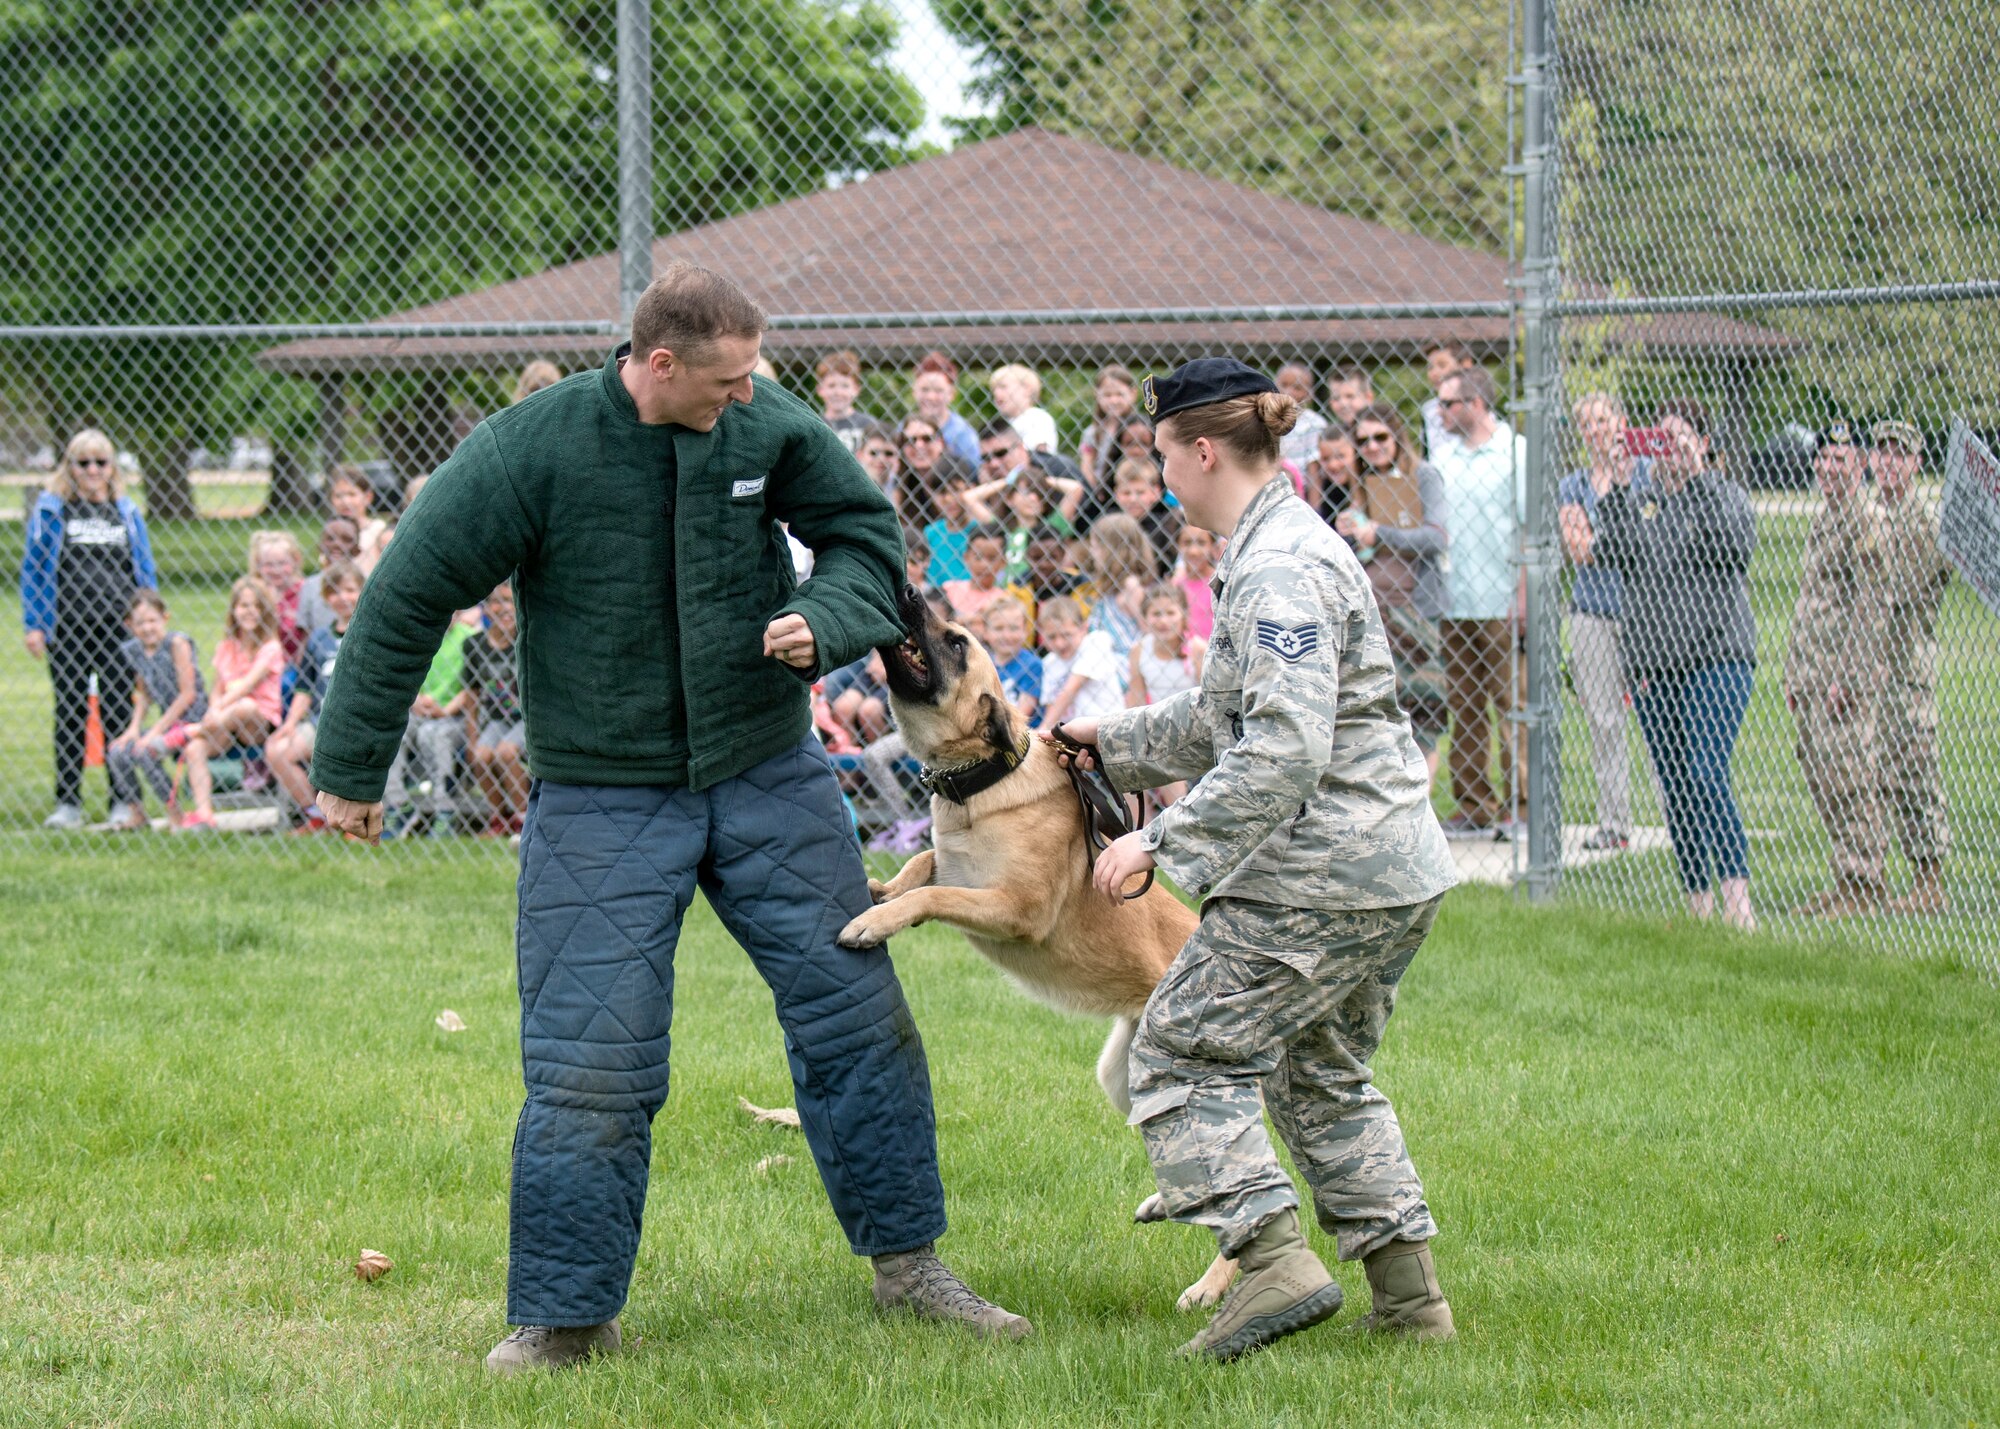 U.S. Air Force Maj. Joseph Schneider, 92nd Security Forces Squadron commander, participates in a military working dog demonstration at a Law Enforcement Exposition during National Police Week at Fairchild Air Force Base, Washington, May 14, 2019. The 92nd SFS hosts a week-long celebration to honor the lives lost through a memorial Fallen Defender Ruck, a law enforcement exposition for the kids, a retreat ceremony and a battle of the badge competition between security forces and the fire department. (U.S. Air Force photo by Airman 1st Class Whitney Laine)